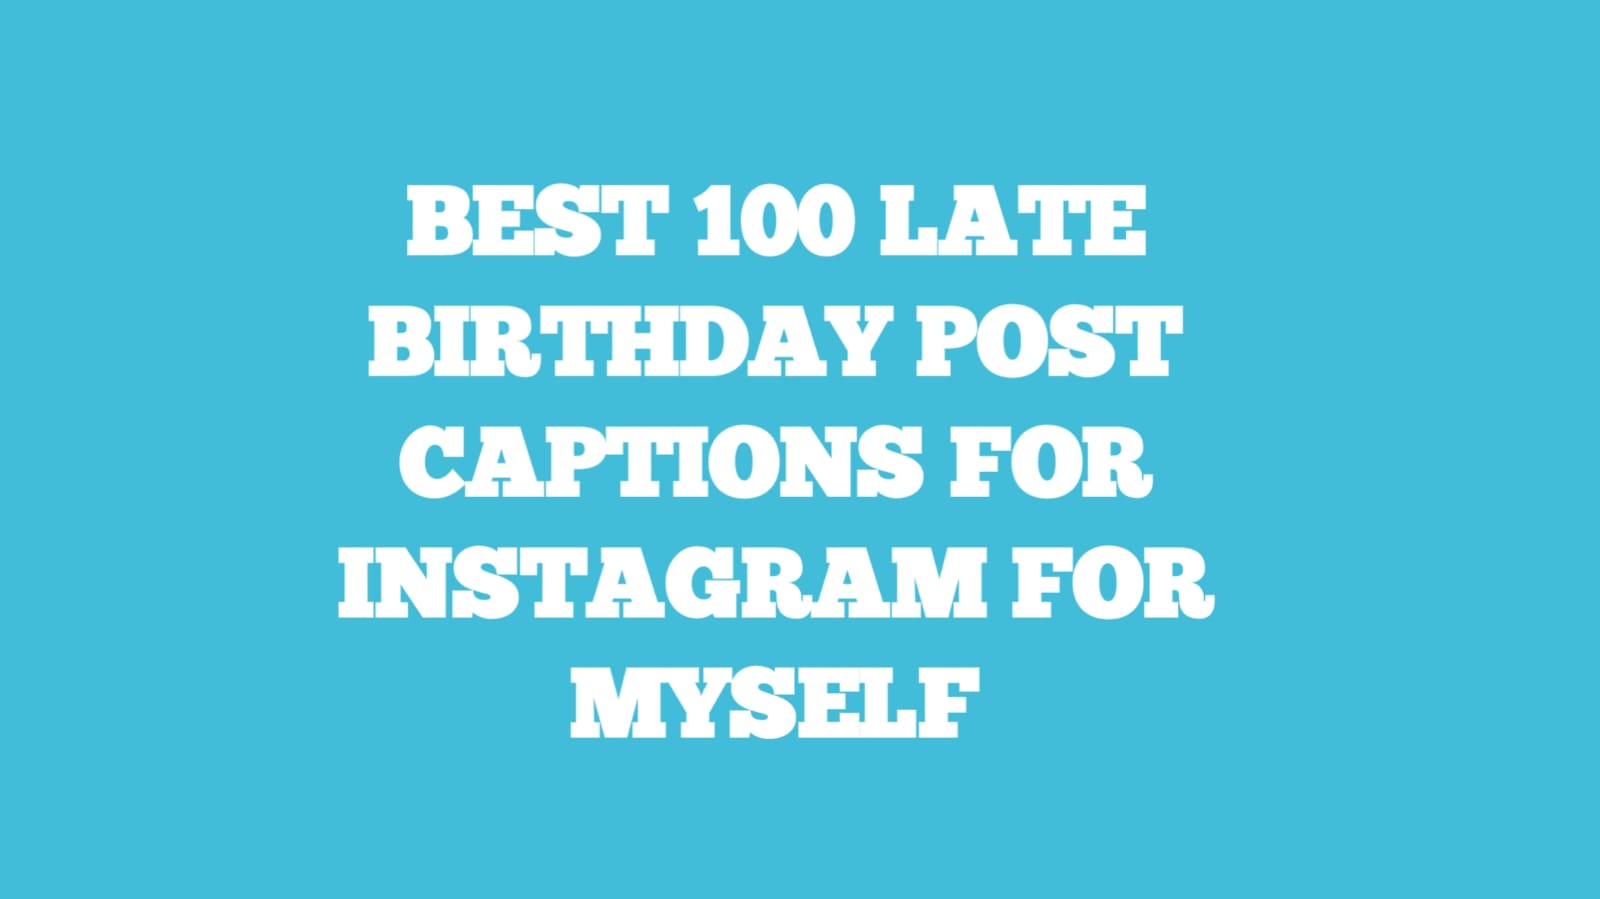 Late birthday post captions for Instagram for myself.